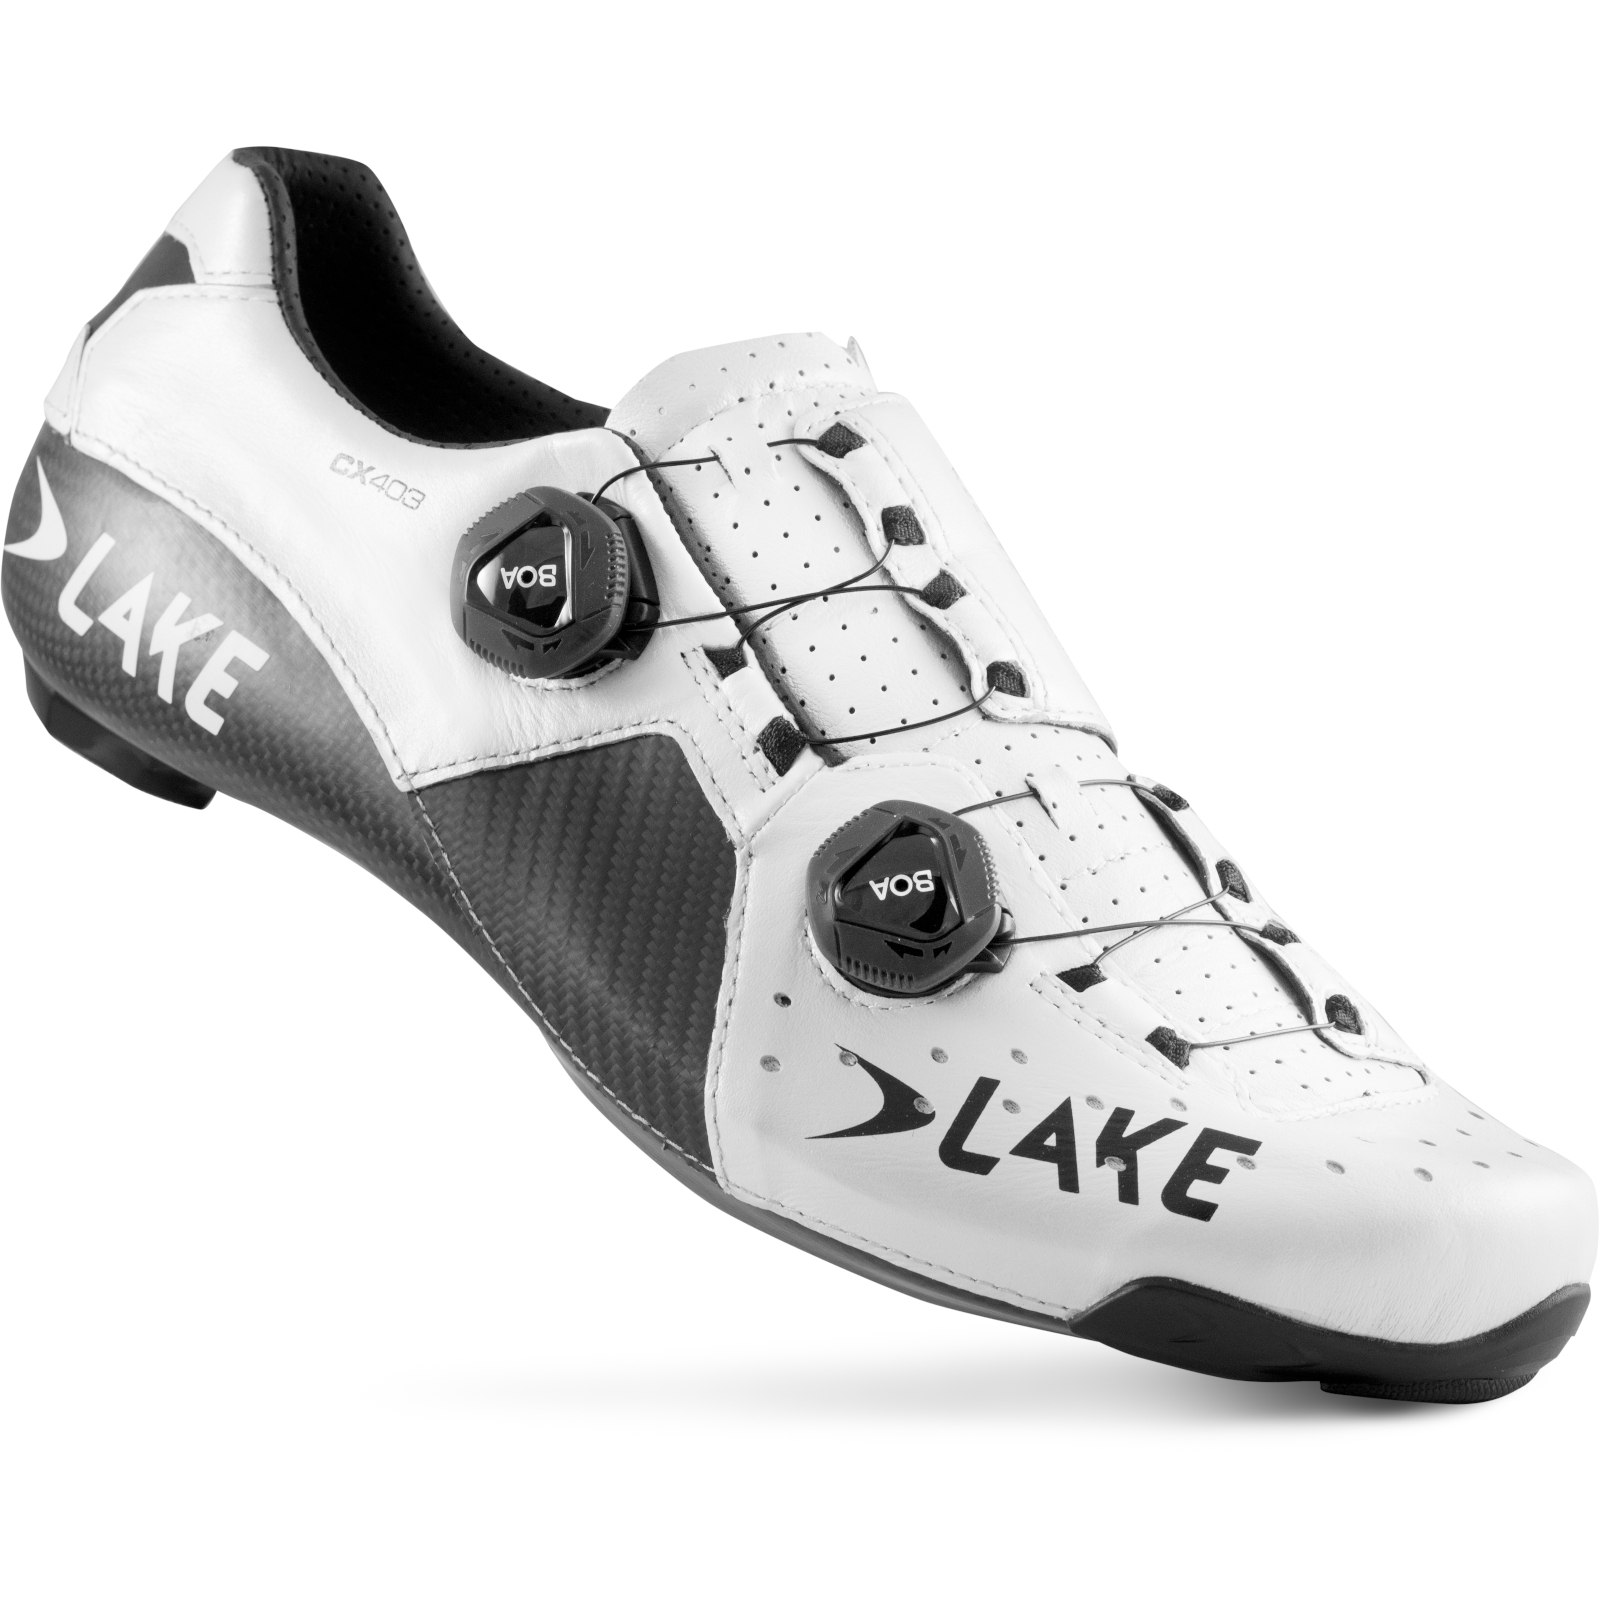 Picture of Lake CX 403 SPDPLY Road Shoe - white/black - 2nd Choice